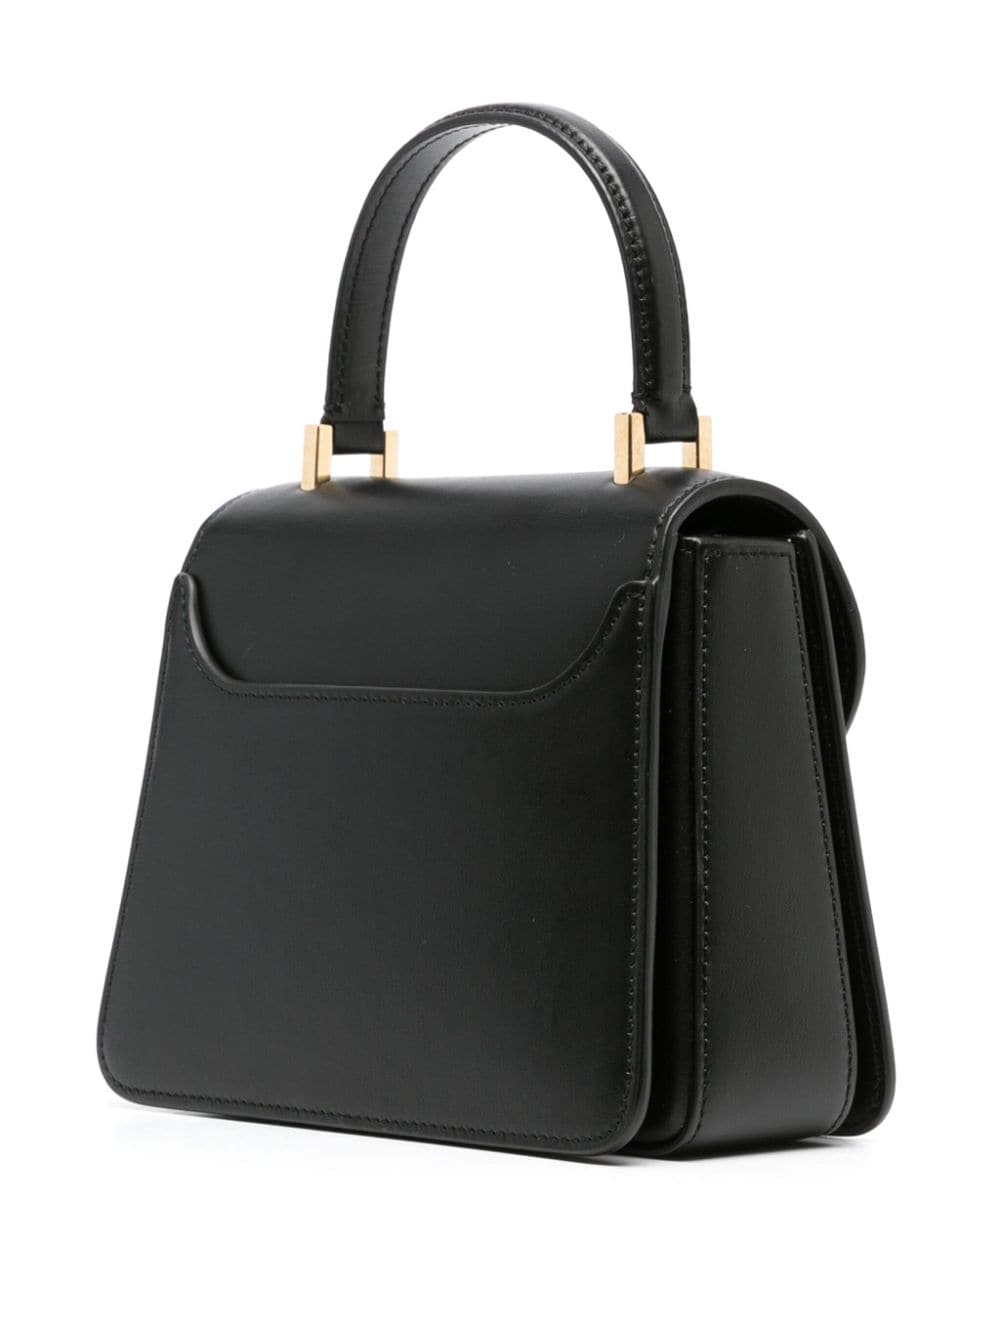 LANVIN Concerto Small Black Leather Top-Handle Shoulder Bag with Gold-Tone Accents